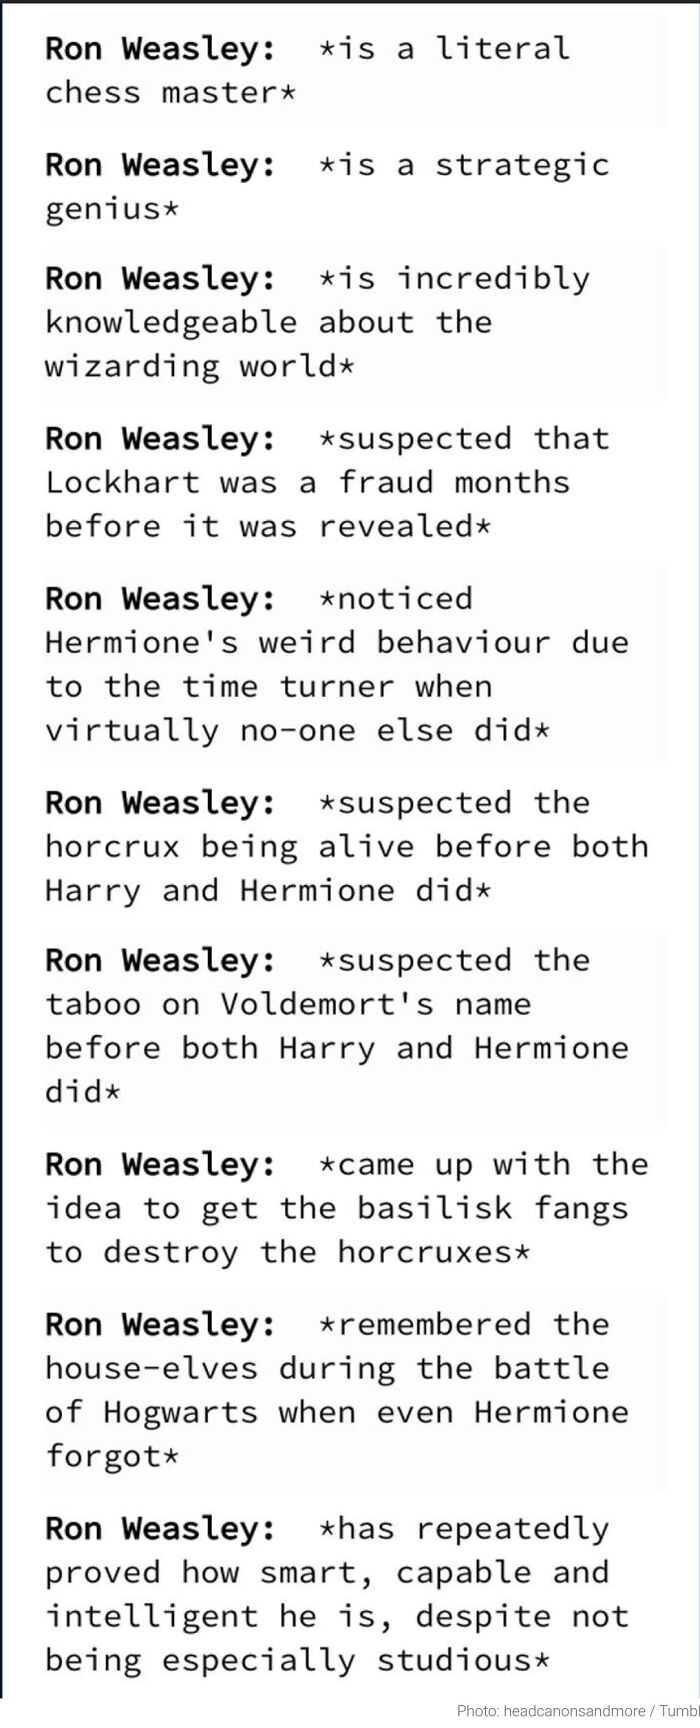 Found This On Fb, And I Completely Agree! Weasley Is Our King